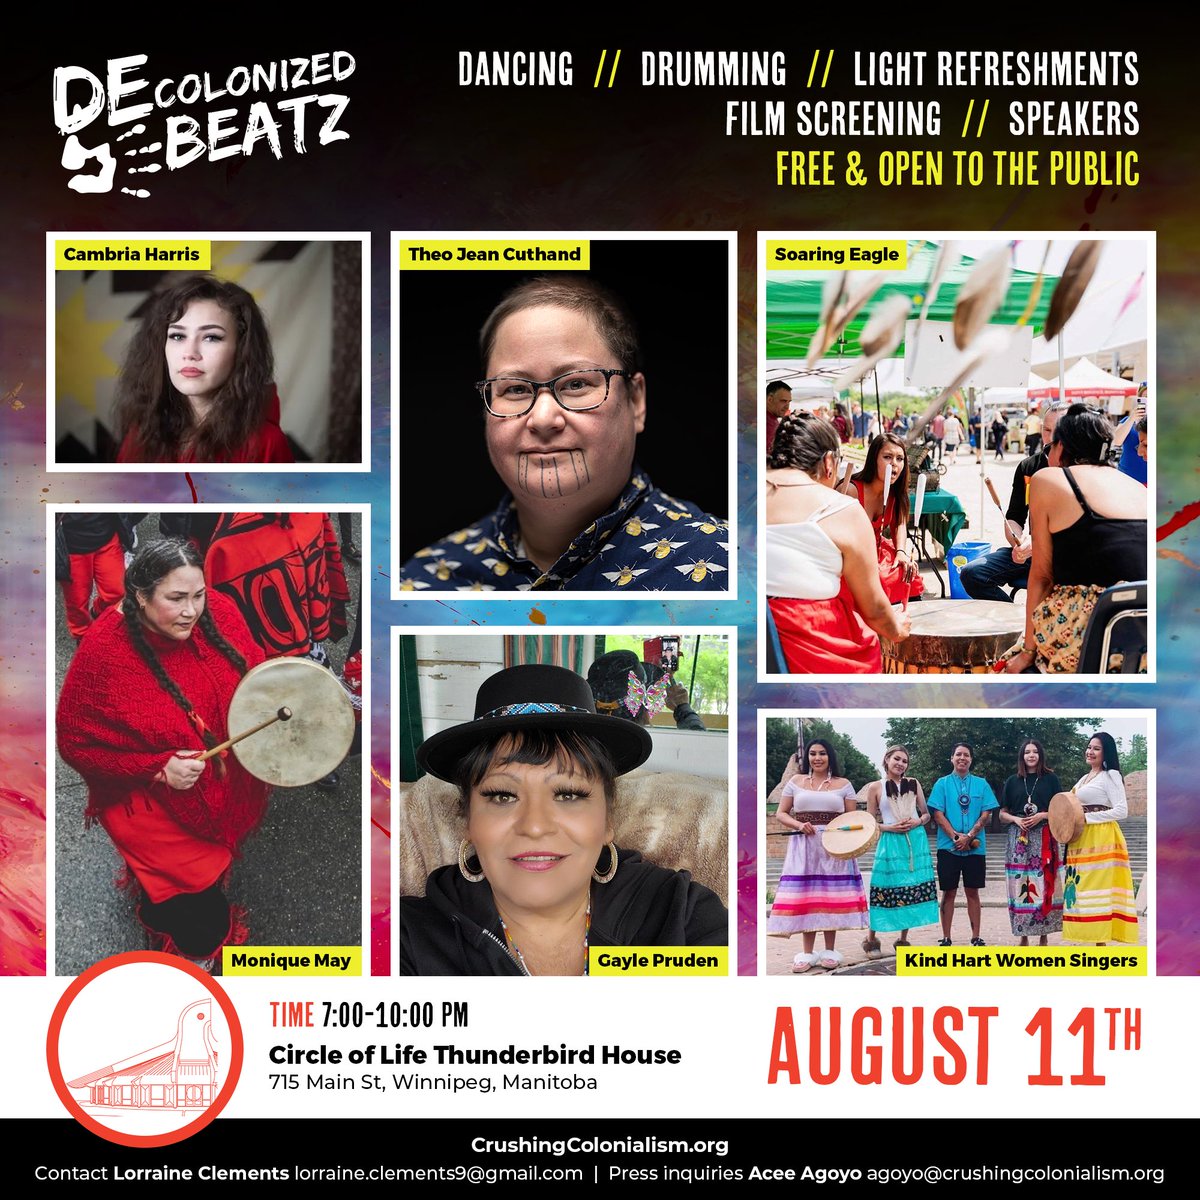 Join us NEXT Friday, August 11th, 7-10pm, at Thunderbird House, 715 Main St, Winnipeg for our first ever Decolonized Beatz, Indigenous World Pride event featuring Indigenous 2SLGBTQIA+ & women performers & speakers. It’s free, family friendly, open to the public & press. #DBIWP